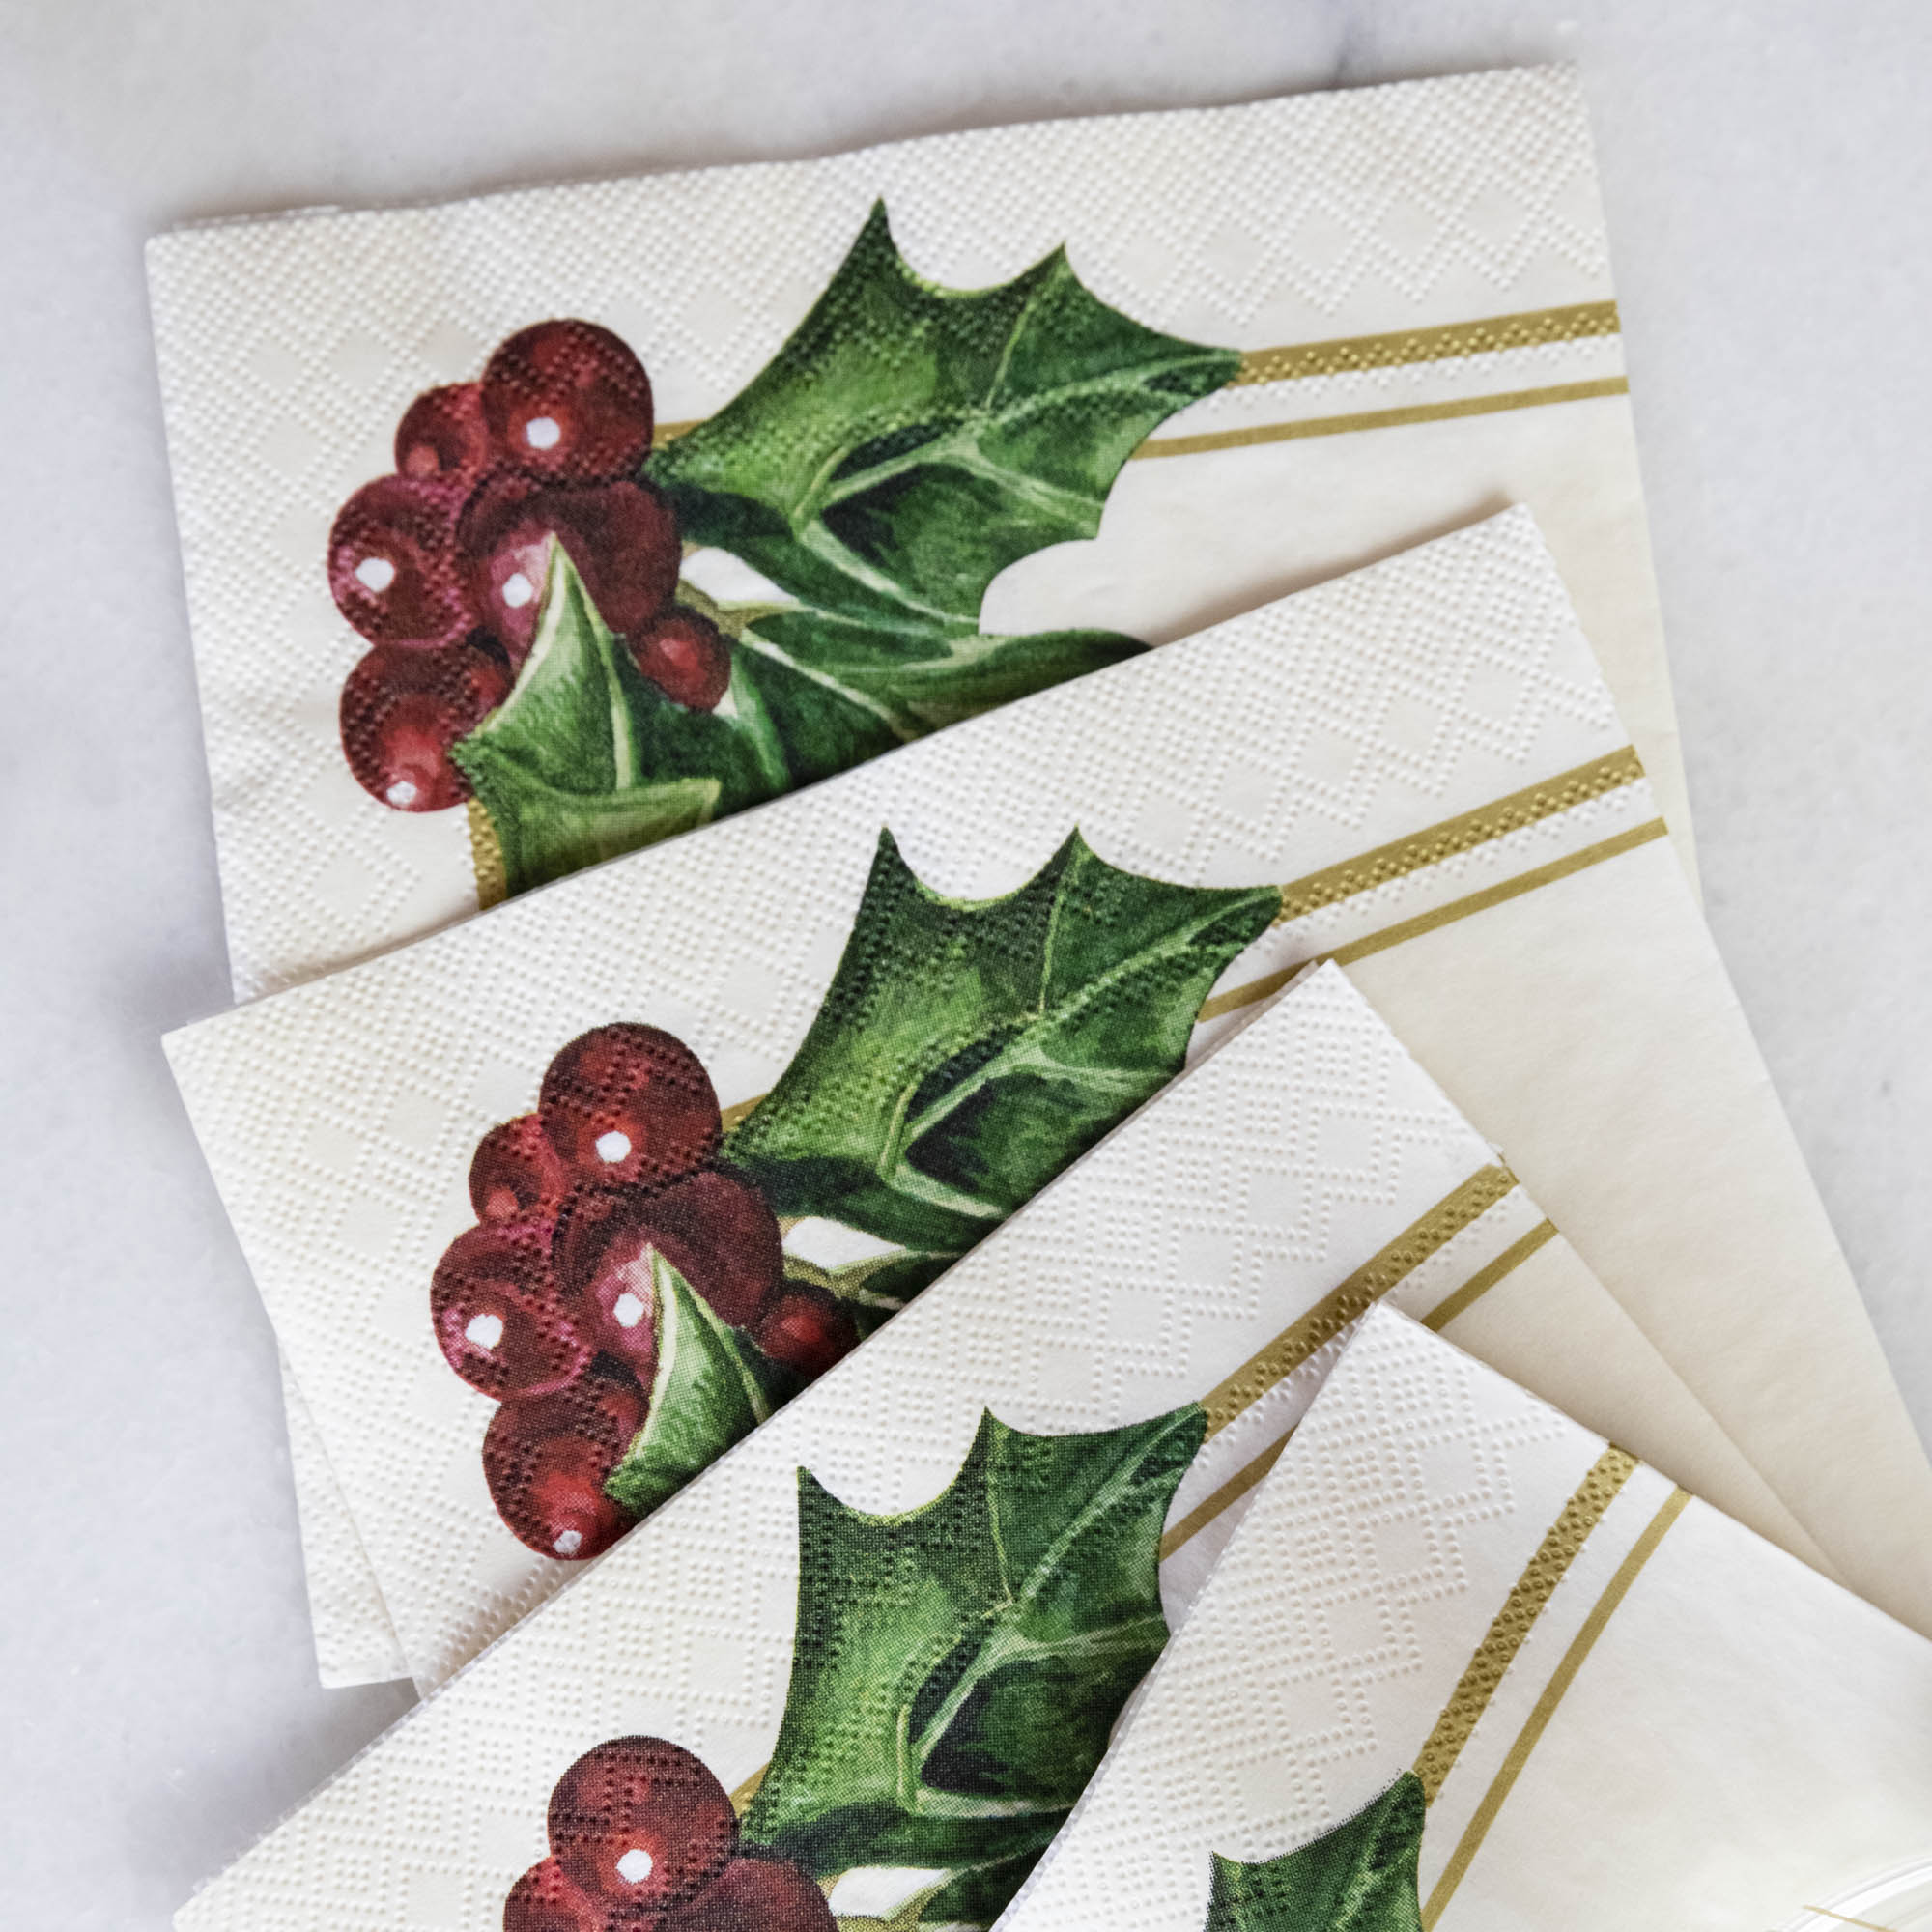 A square cocktail napkin featuring painterly green holly leaves and red berries in the lower right, with decorative gold frame lines along the lower and right edges, on a white background.